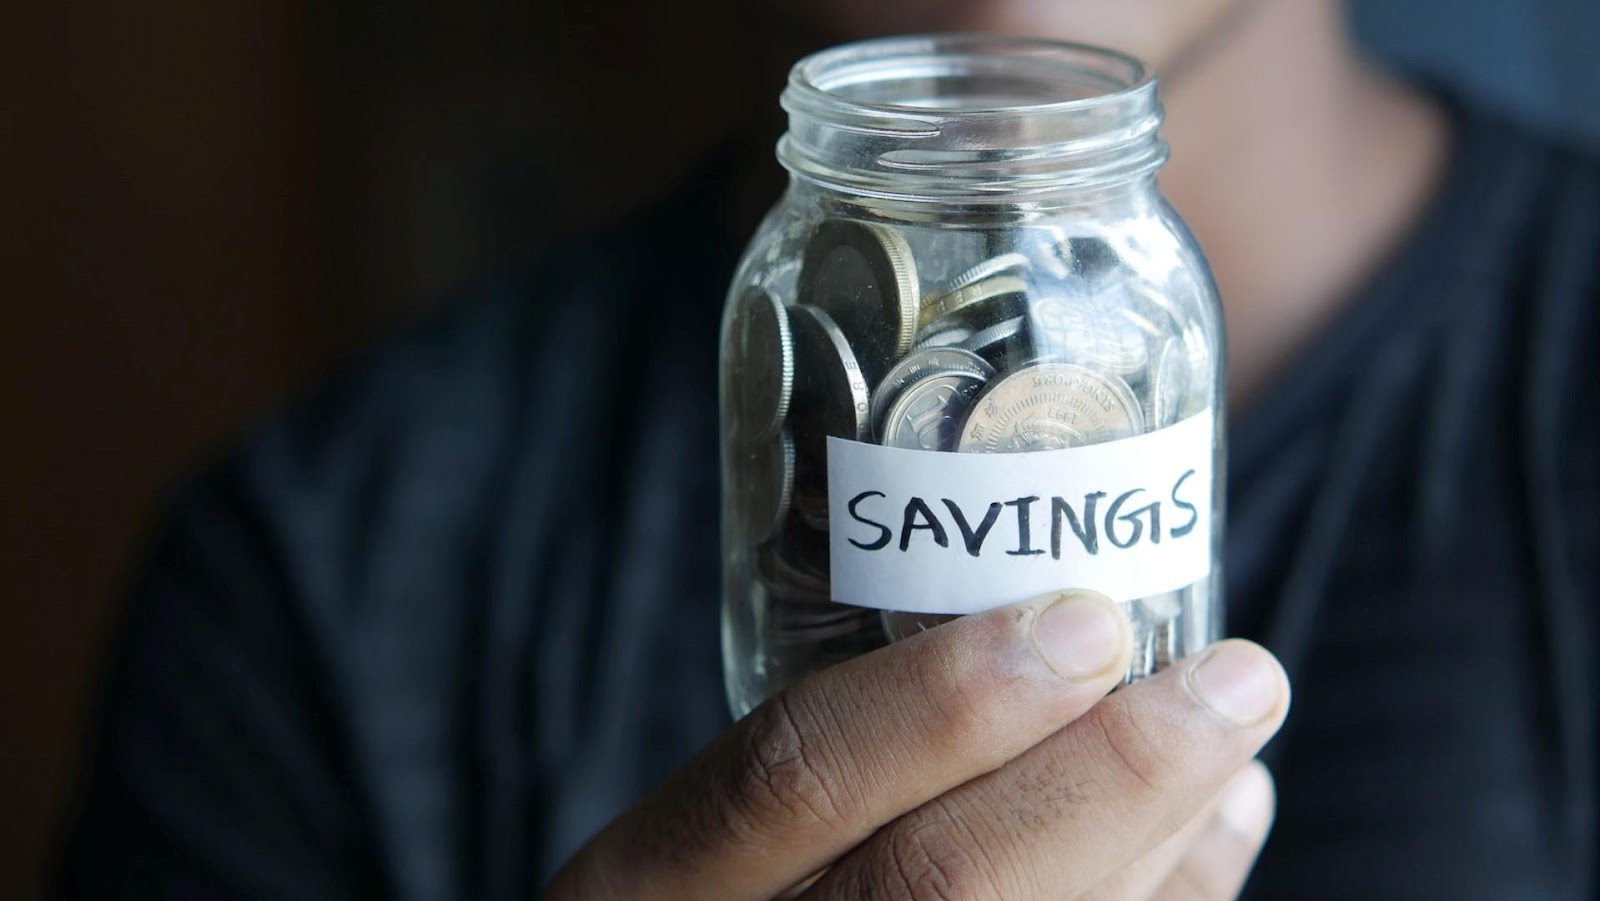 A man holding a jar of coins with the word "savings" written on it.